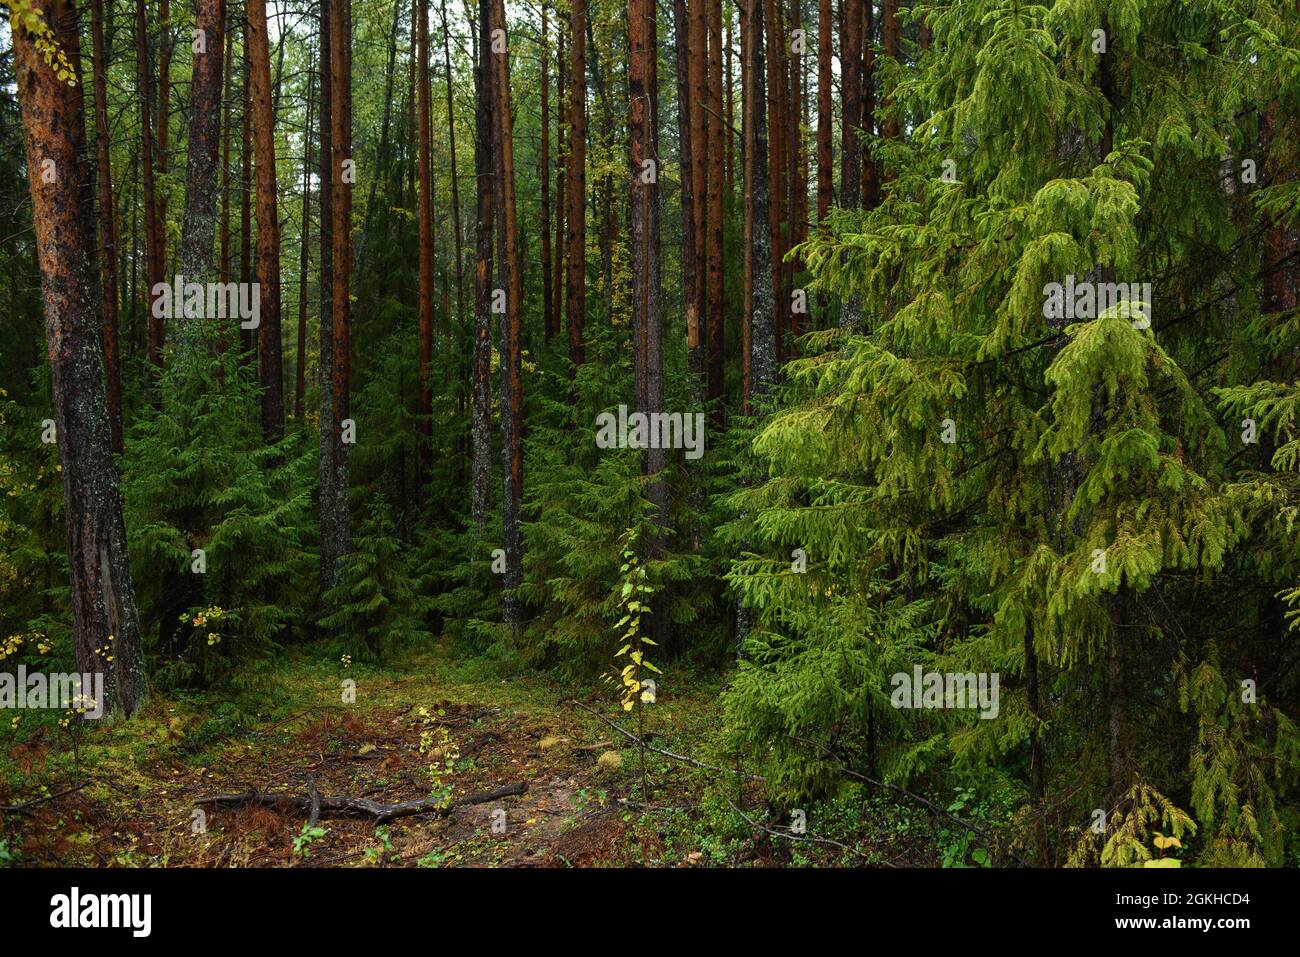 Colors of autumn. Landscape. Mixed forest. Colorful leaves and herbs in early autumn. Stock Photo